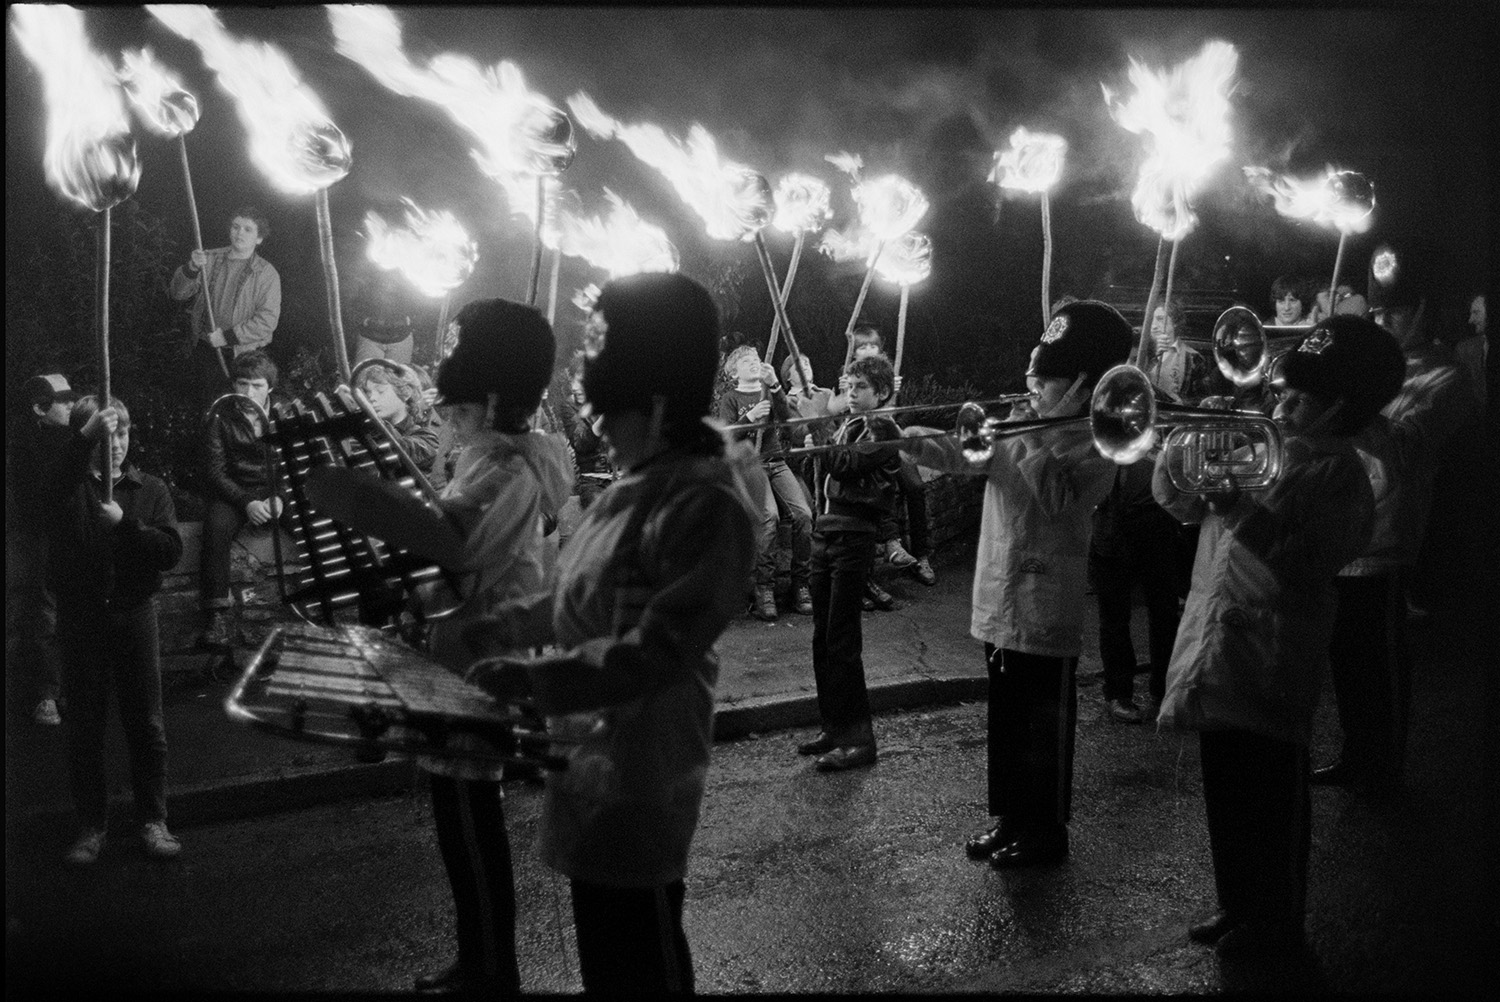 Carnival parade at night, floats flaming torches, Queen in car. 
[A marching band parading along a street at Dolton Carnival. Boys holding flaming torches are lining the street.]